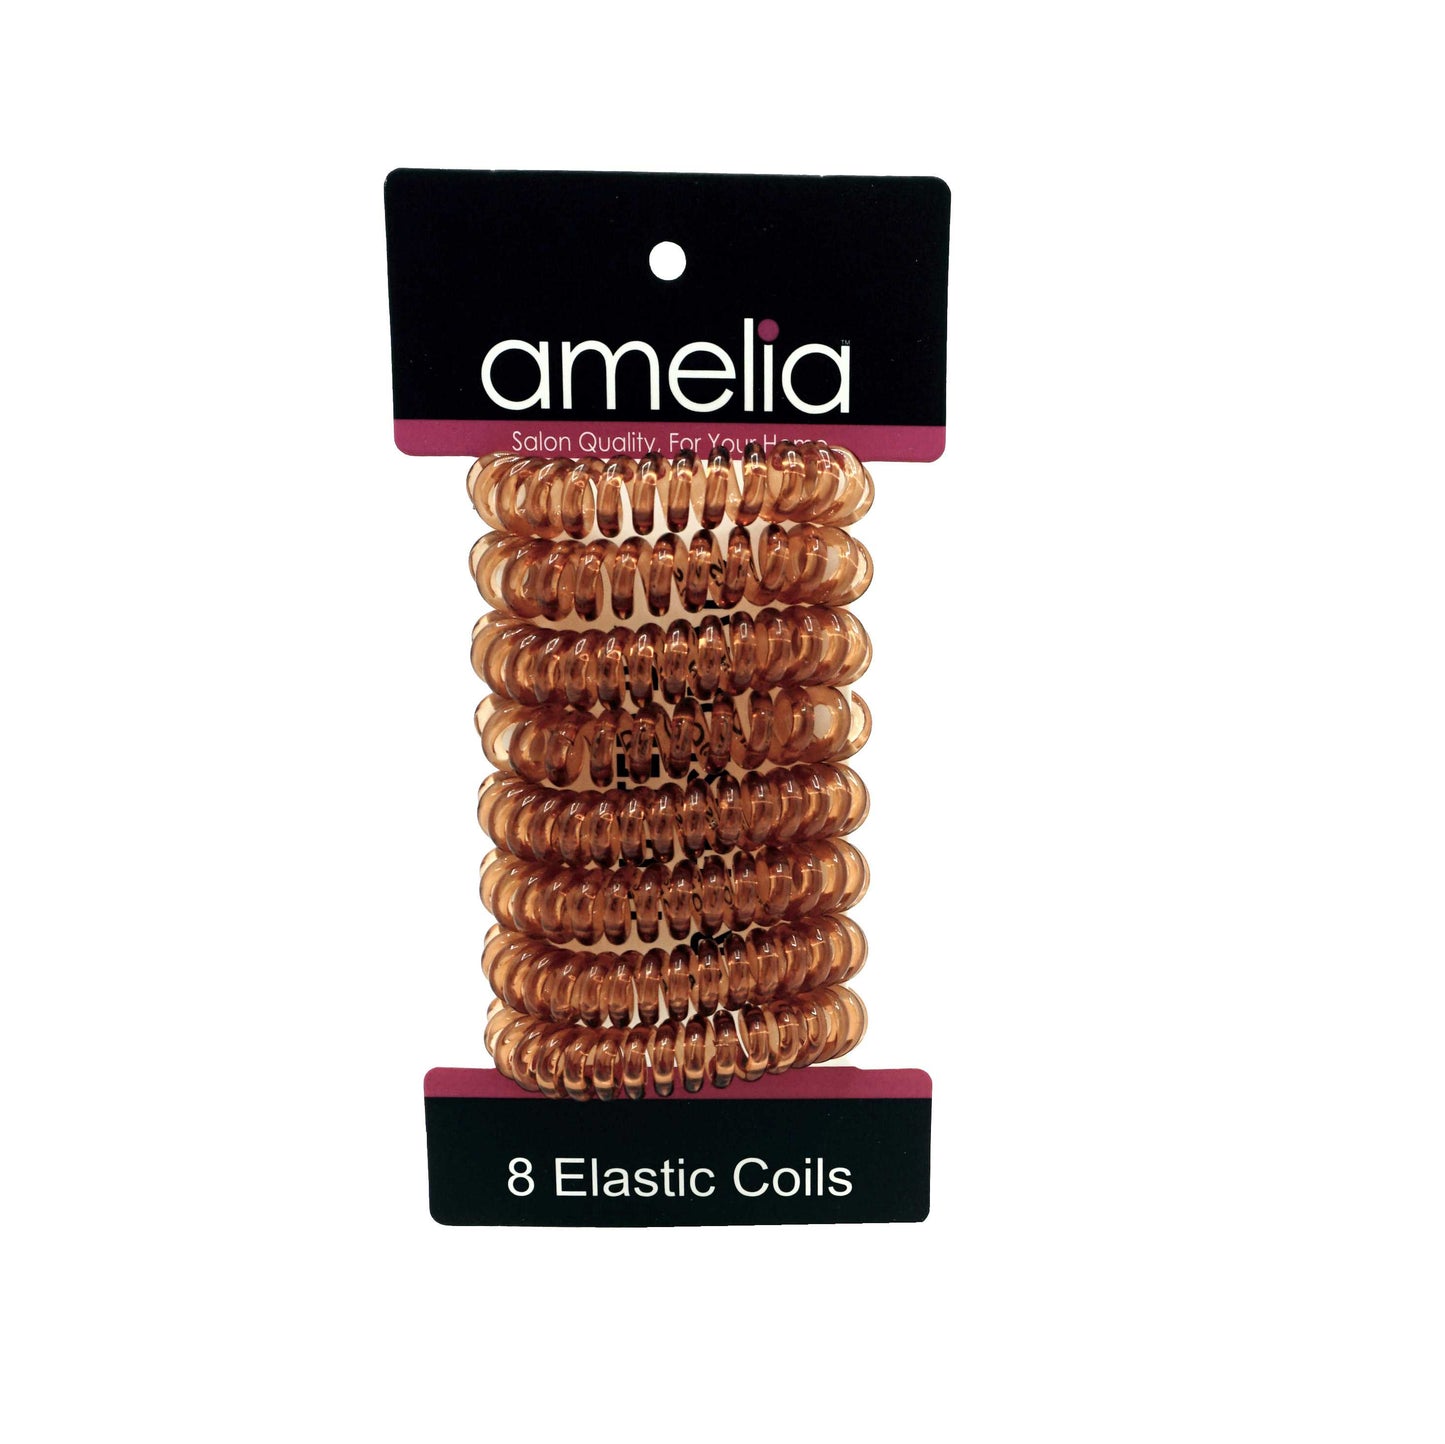 Amelia Beauty Products 8 Small Elastic Hair Coils, 1.5in Diameter Thick Spiral Hair Ties, Gentle on Hair, Strong Hold and Minimizes Dents and Creases, Brown